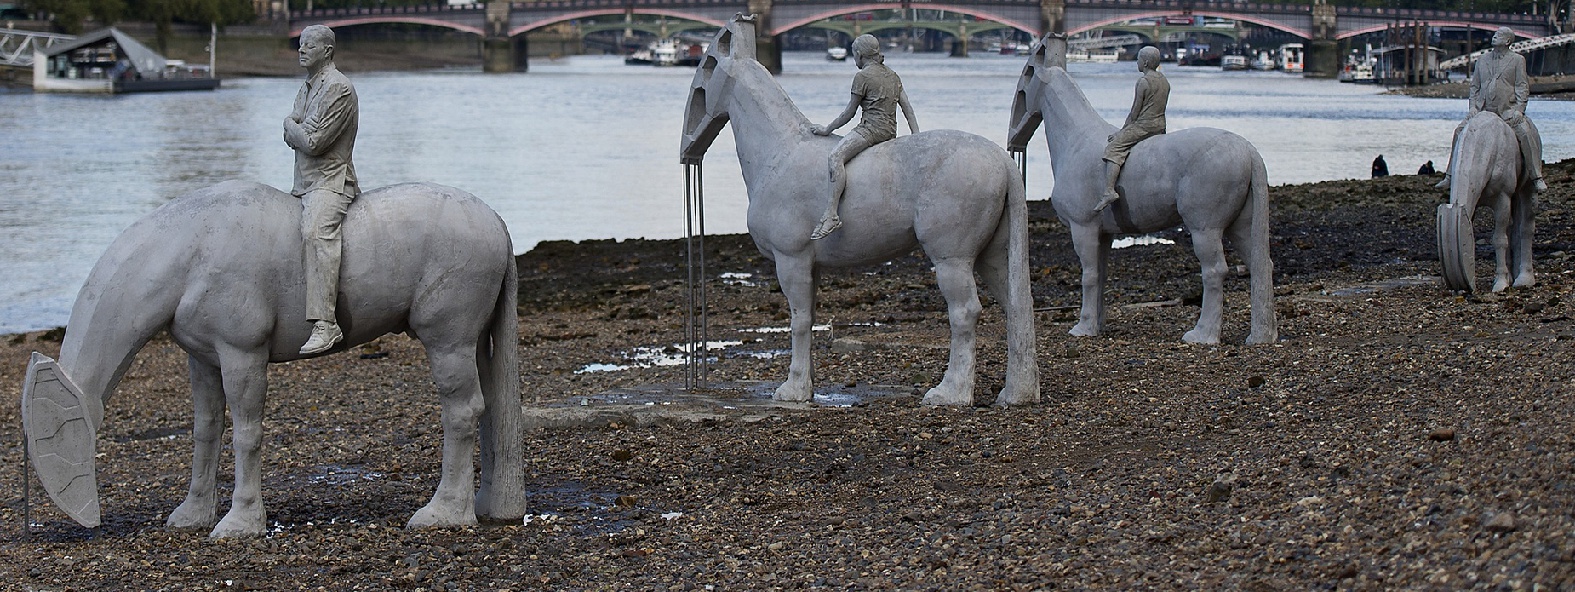 The 4 Horsemen in the River Thames